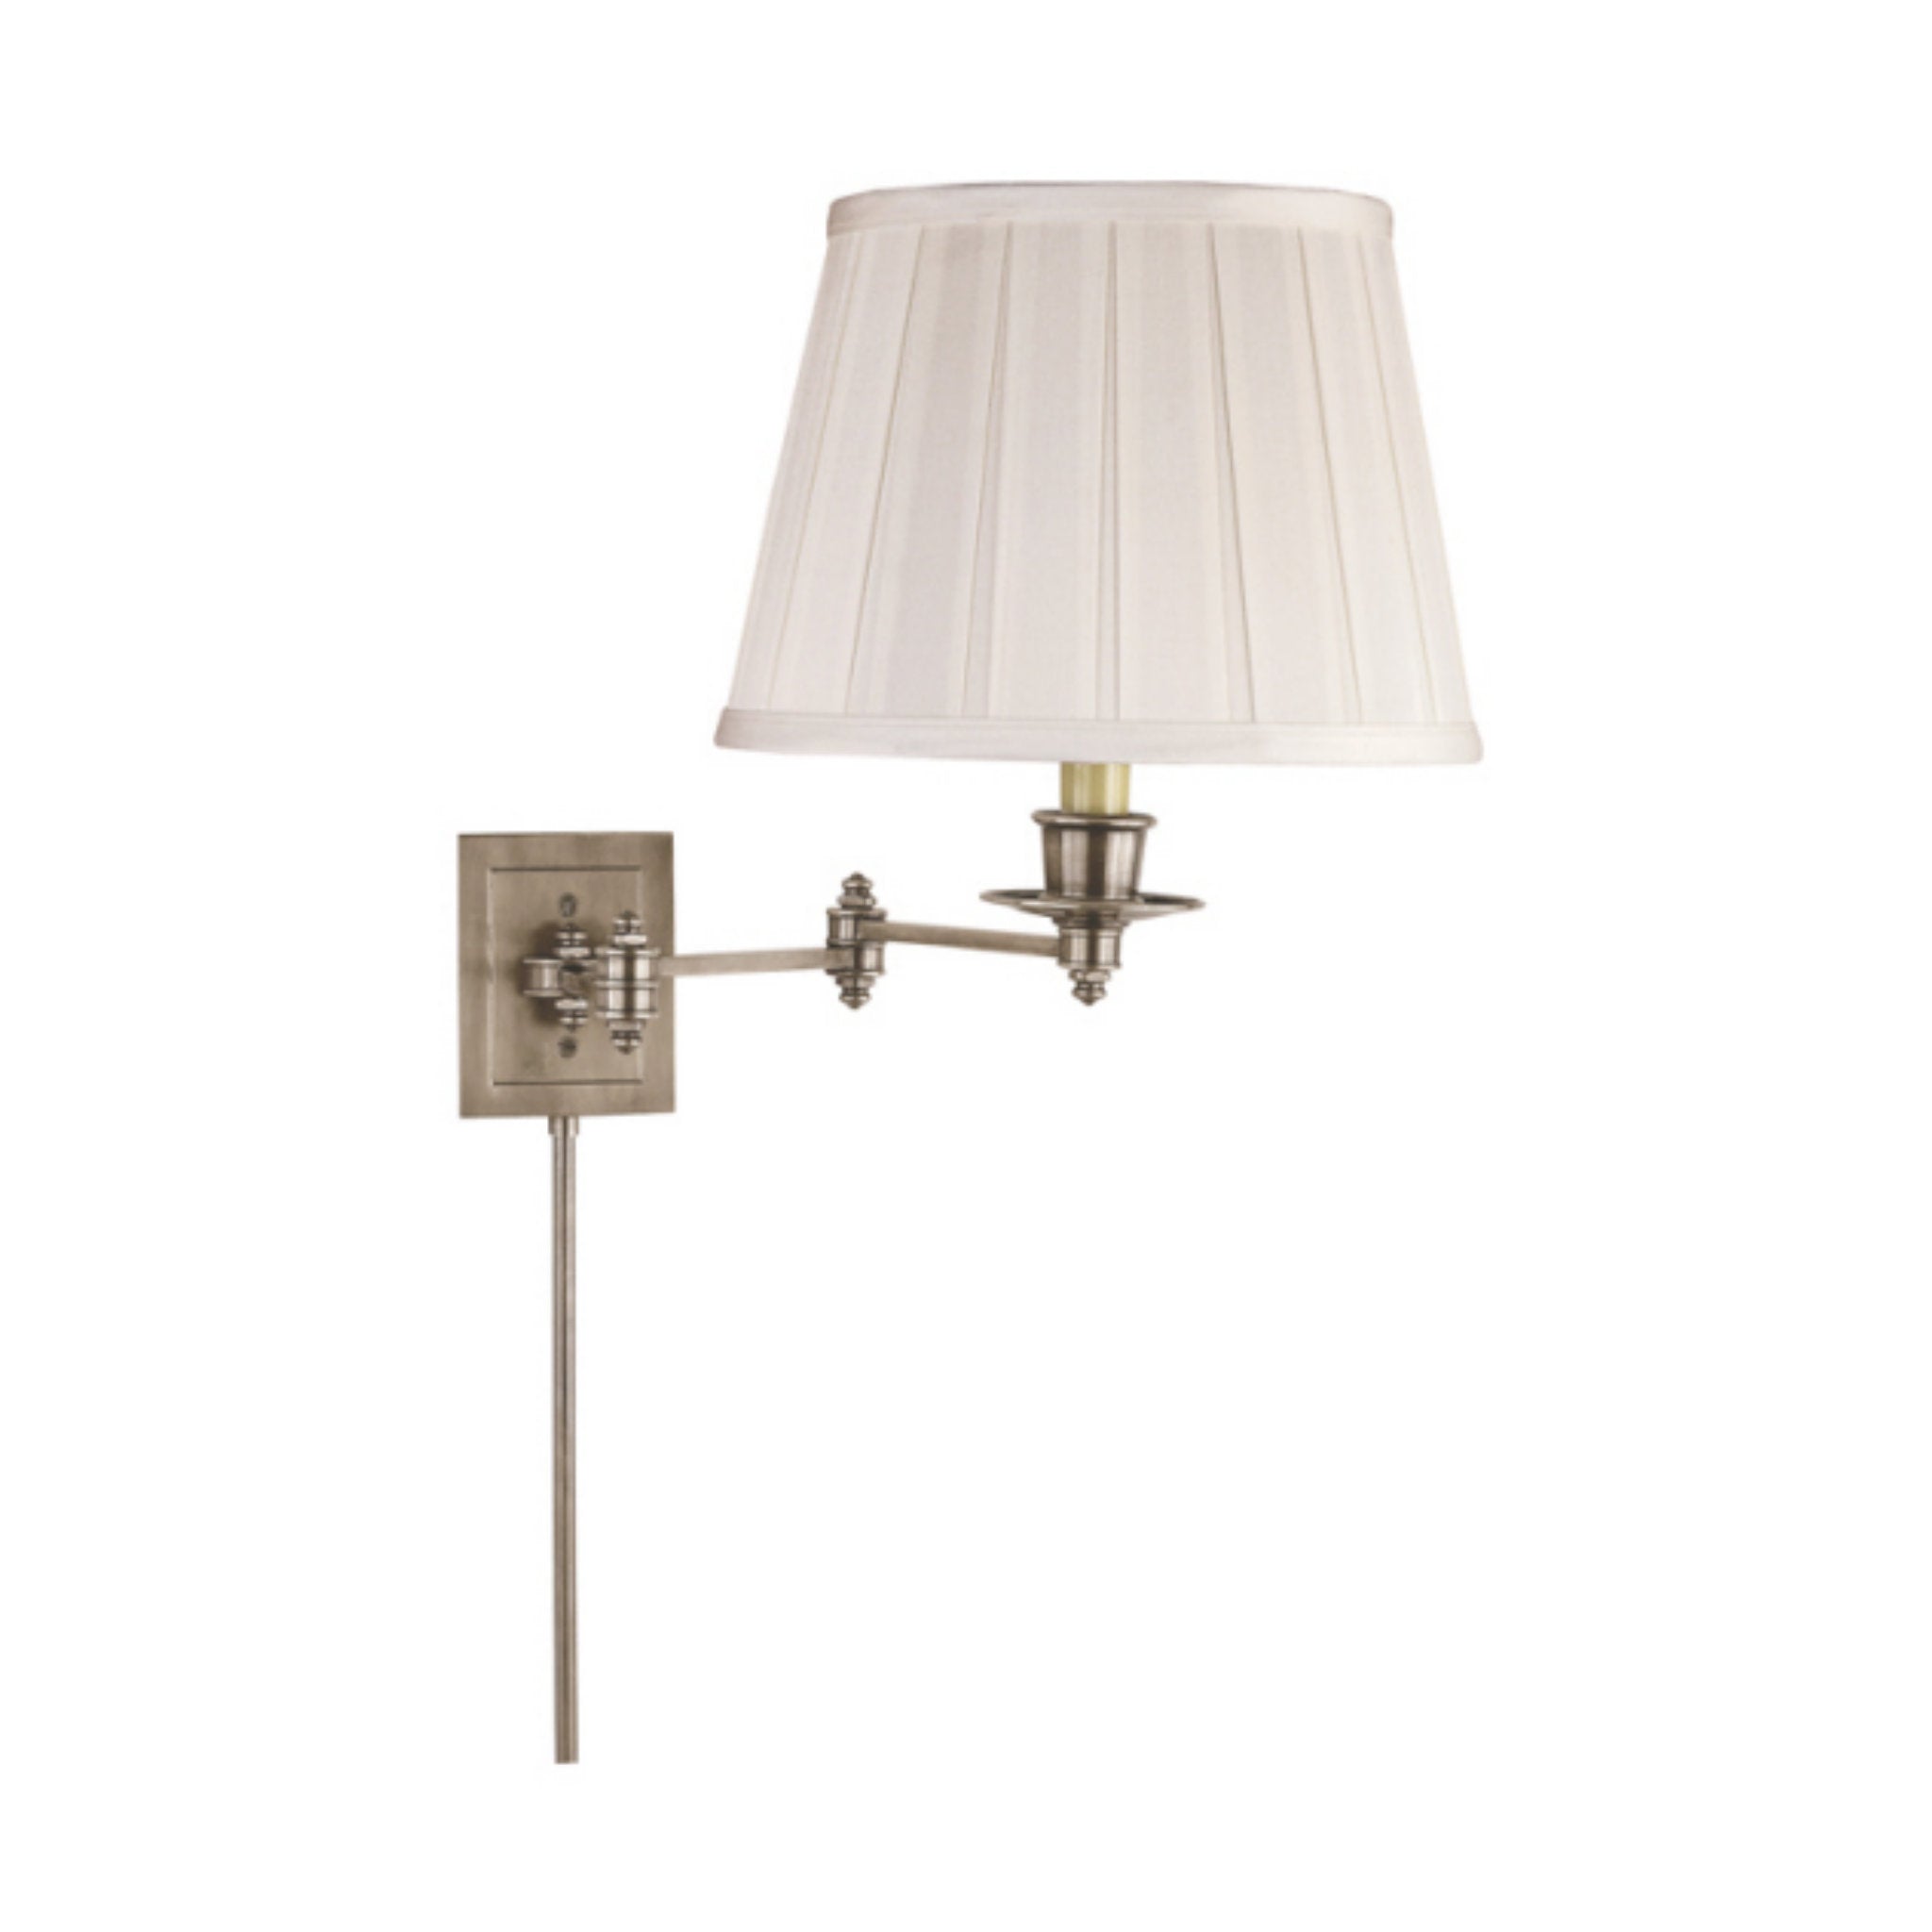 Visual Comfort Triple Swing Arm Wall Lamp in Antique Nickel with Silk Shade